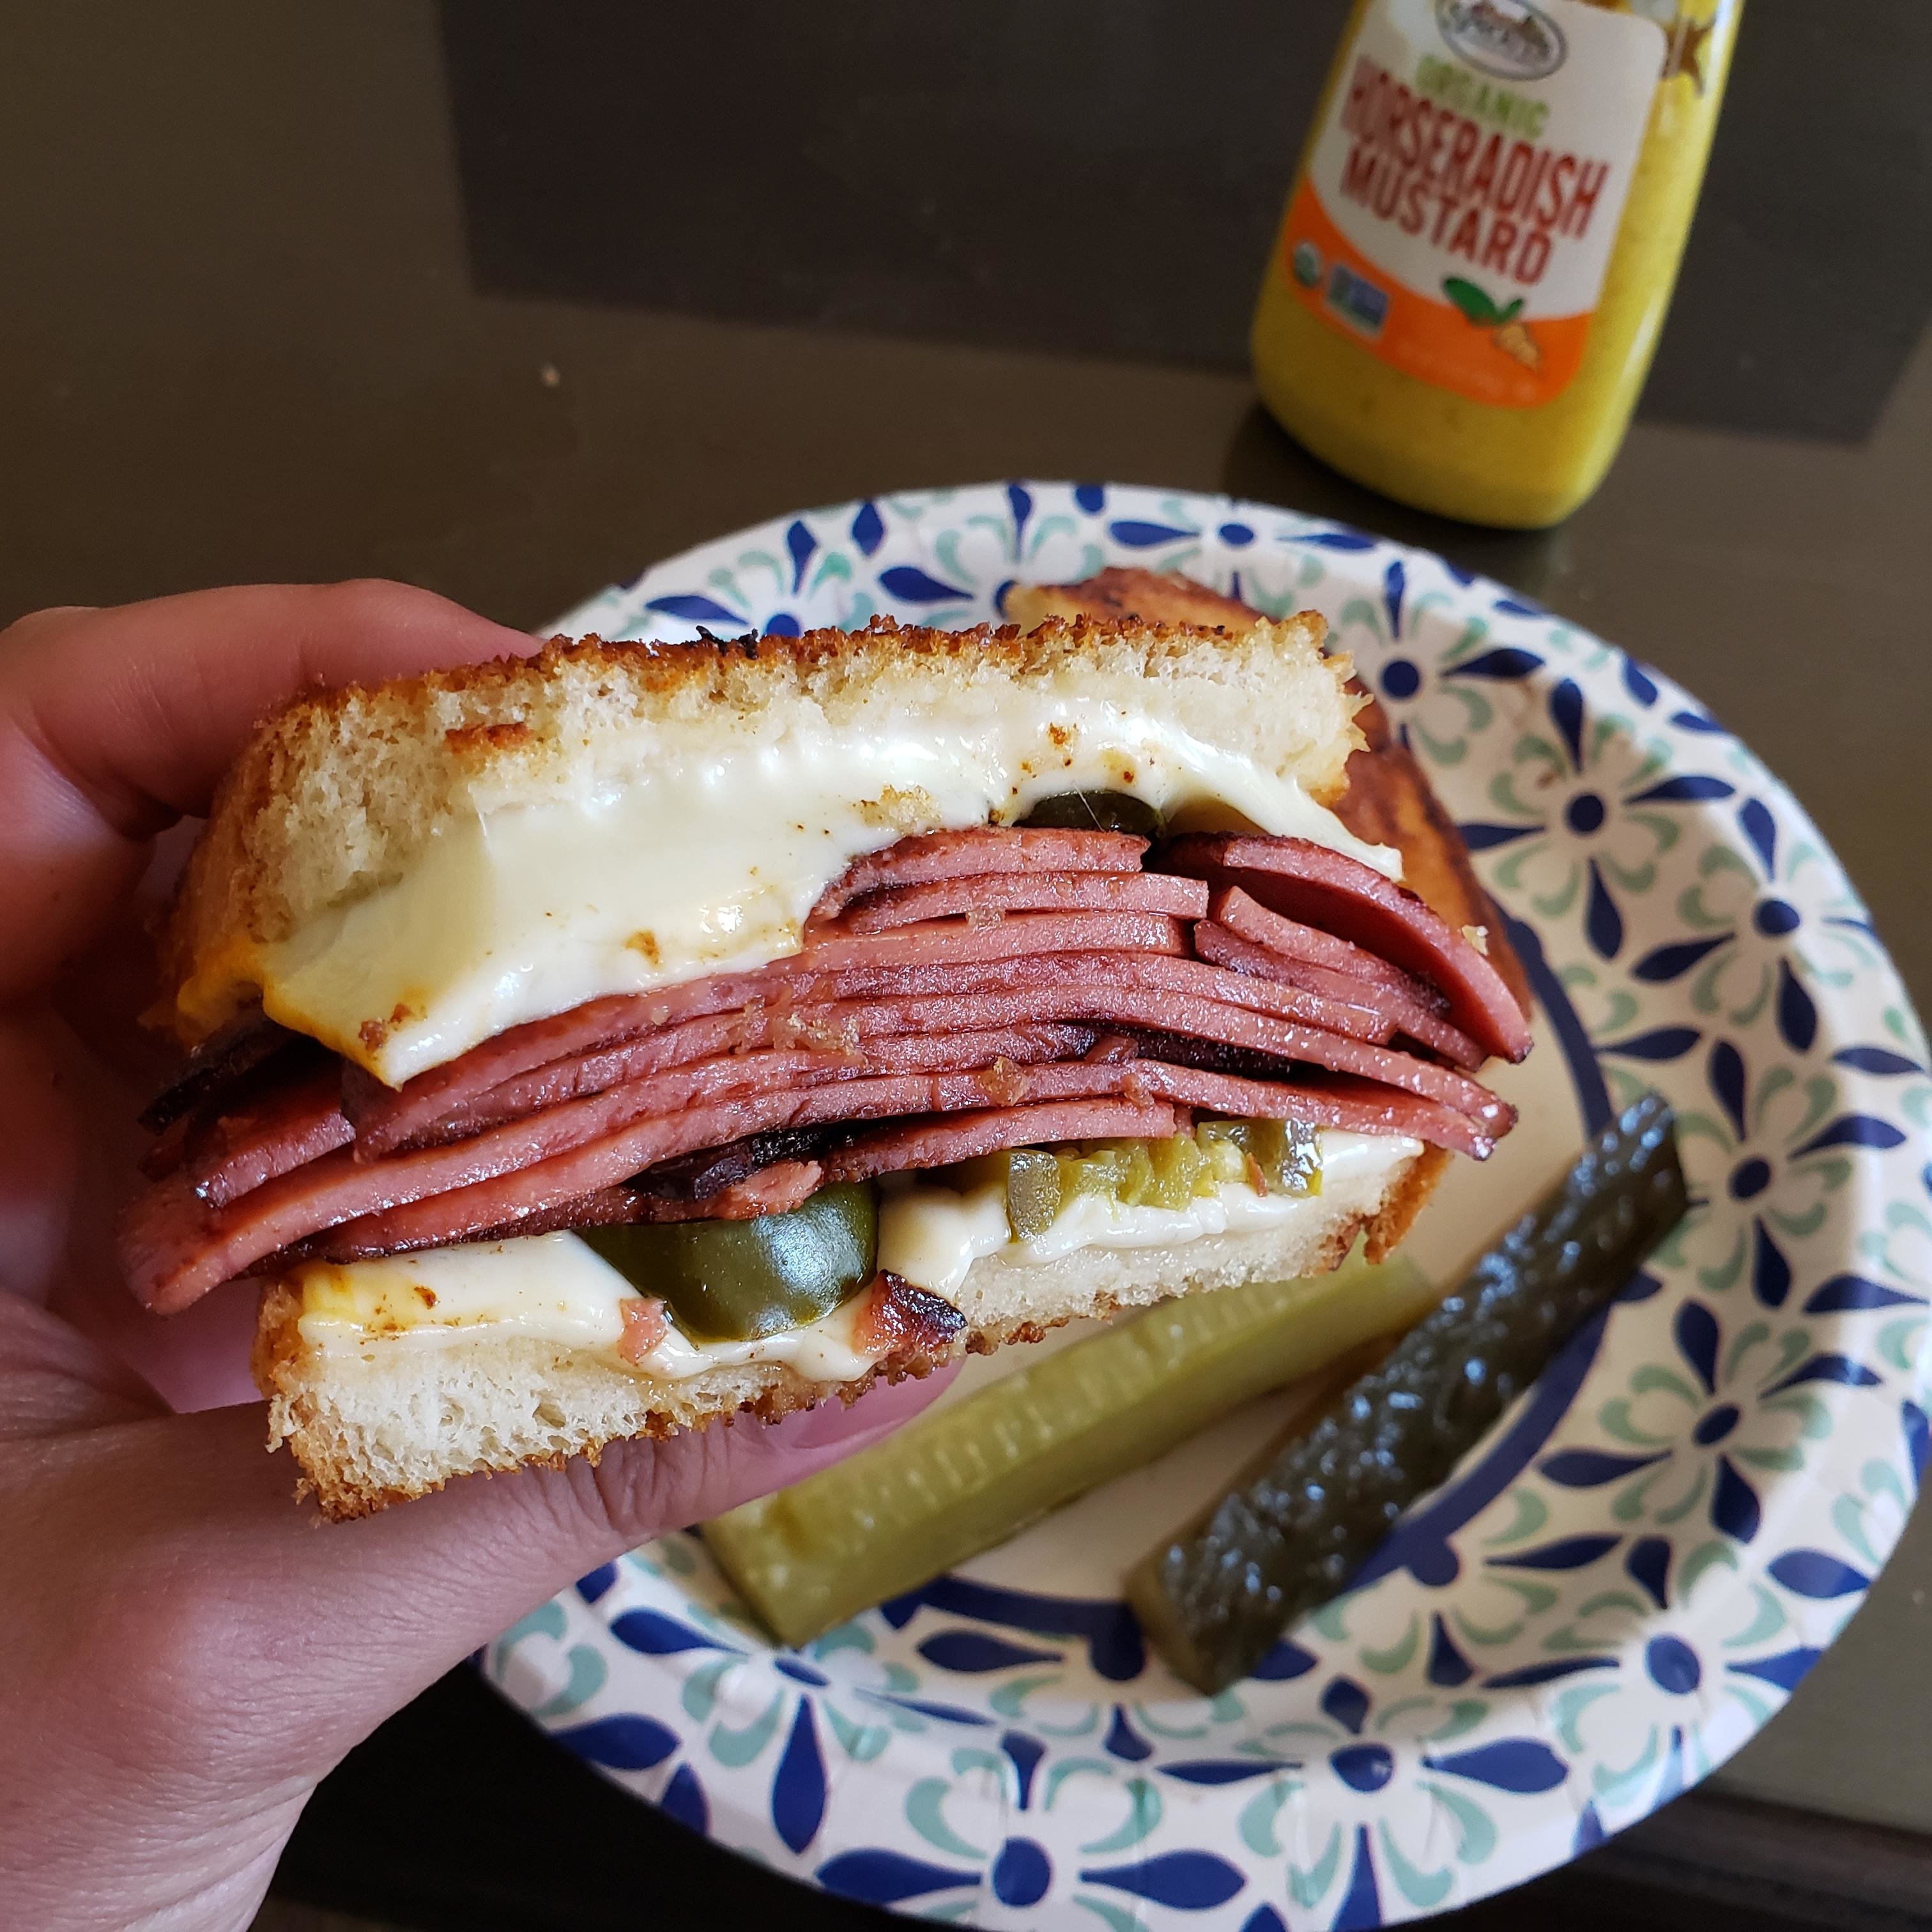 Hand holding a sandwich with multiple salami slices, cheese, and pickles, with a whole pickle on the side